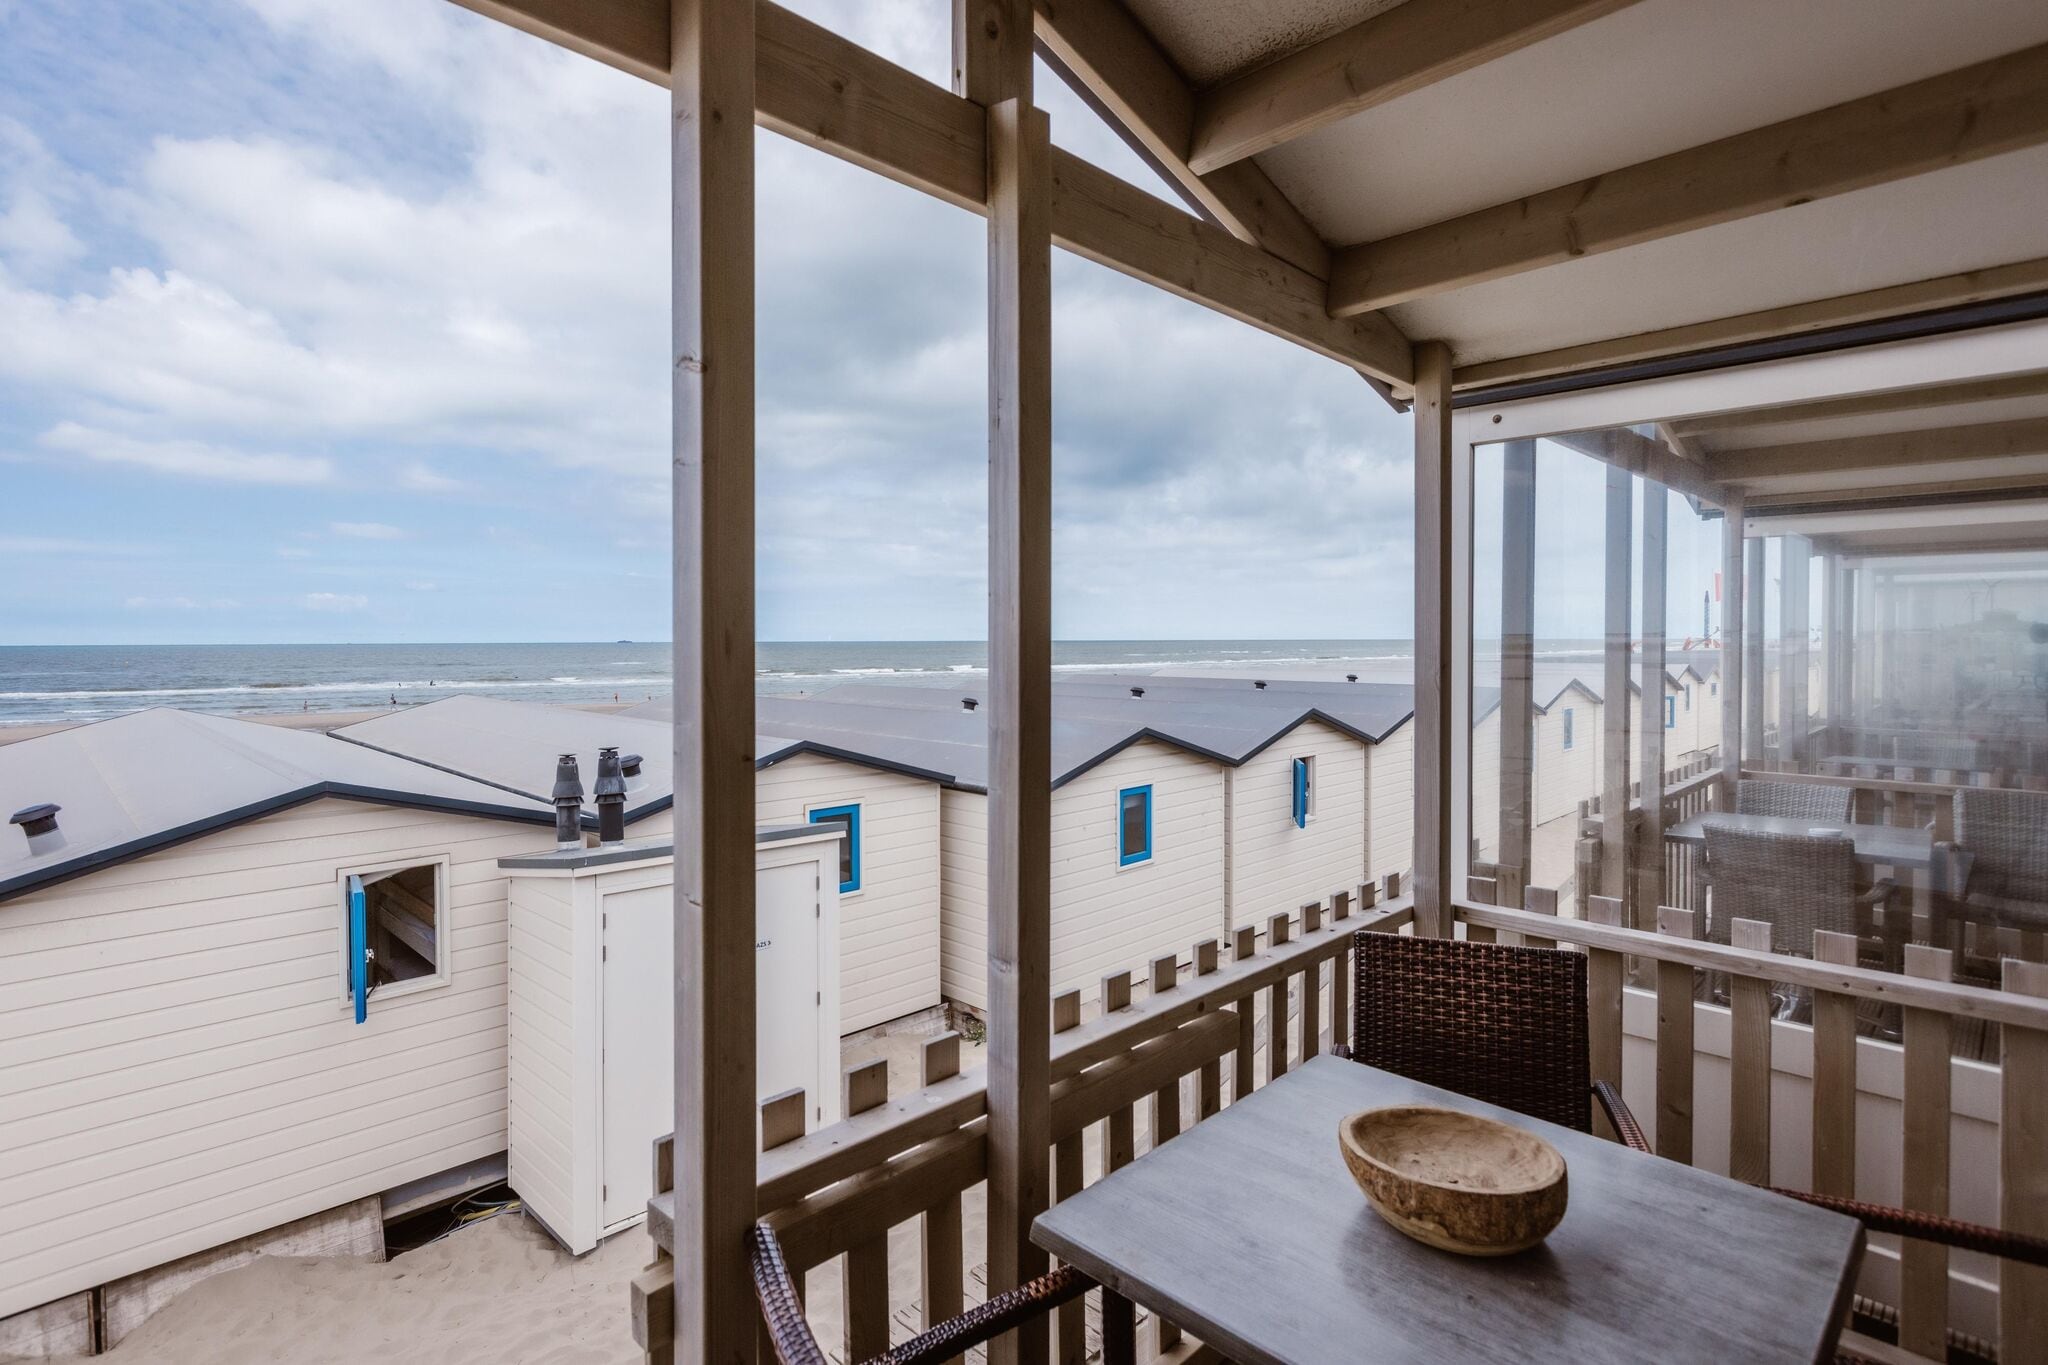 Beautifully situated holiday home on the North Sea beach of Wijk aan Zee